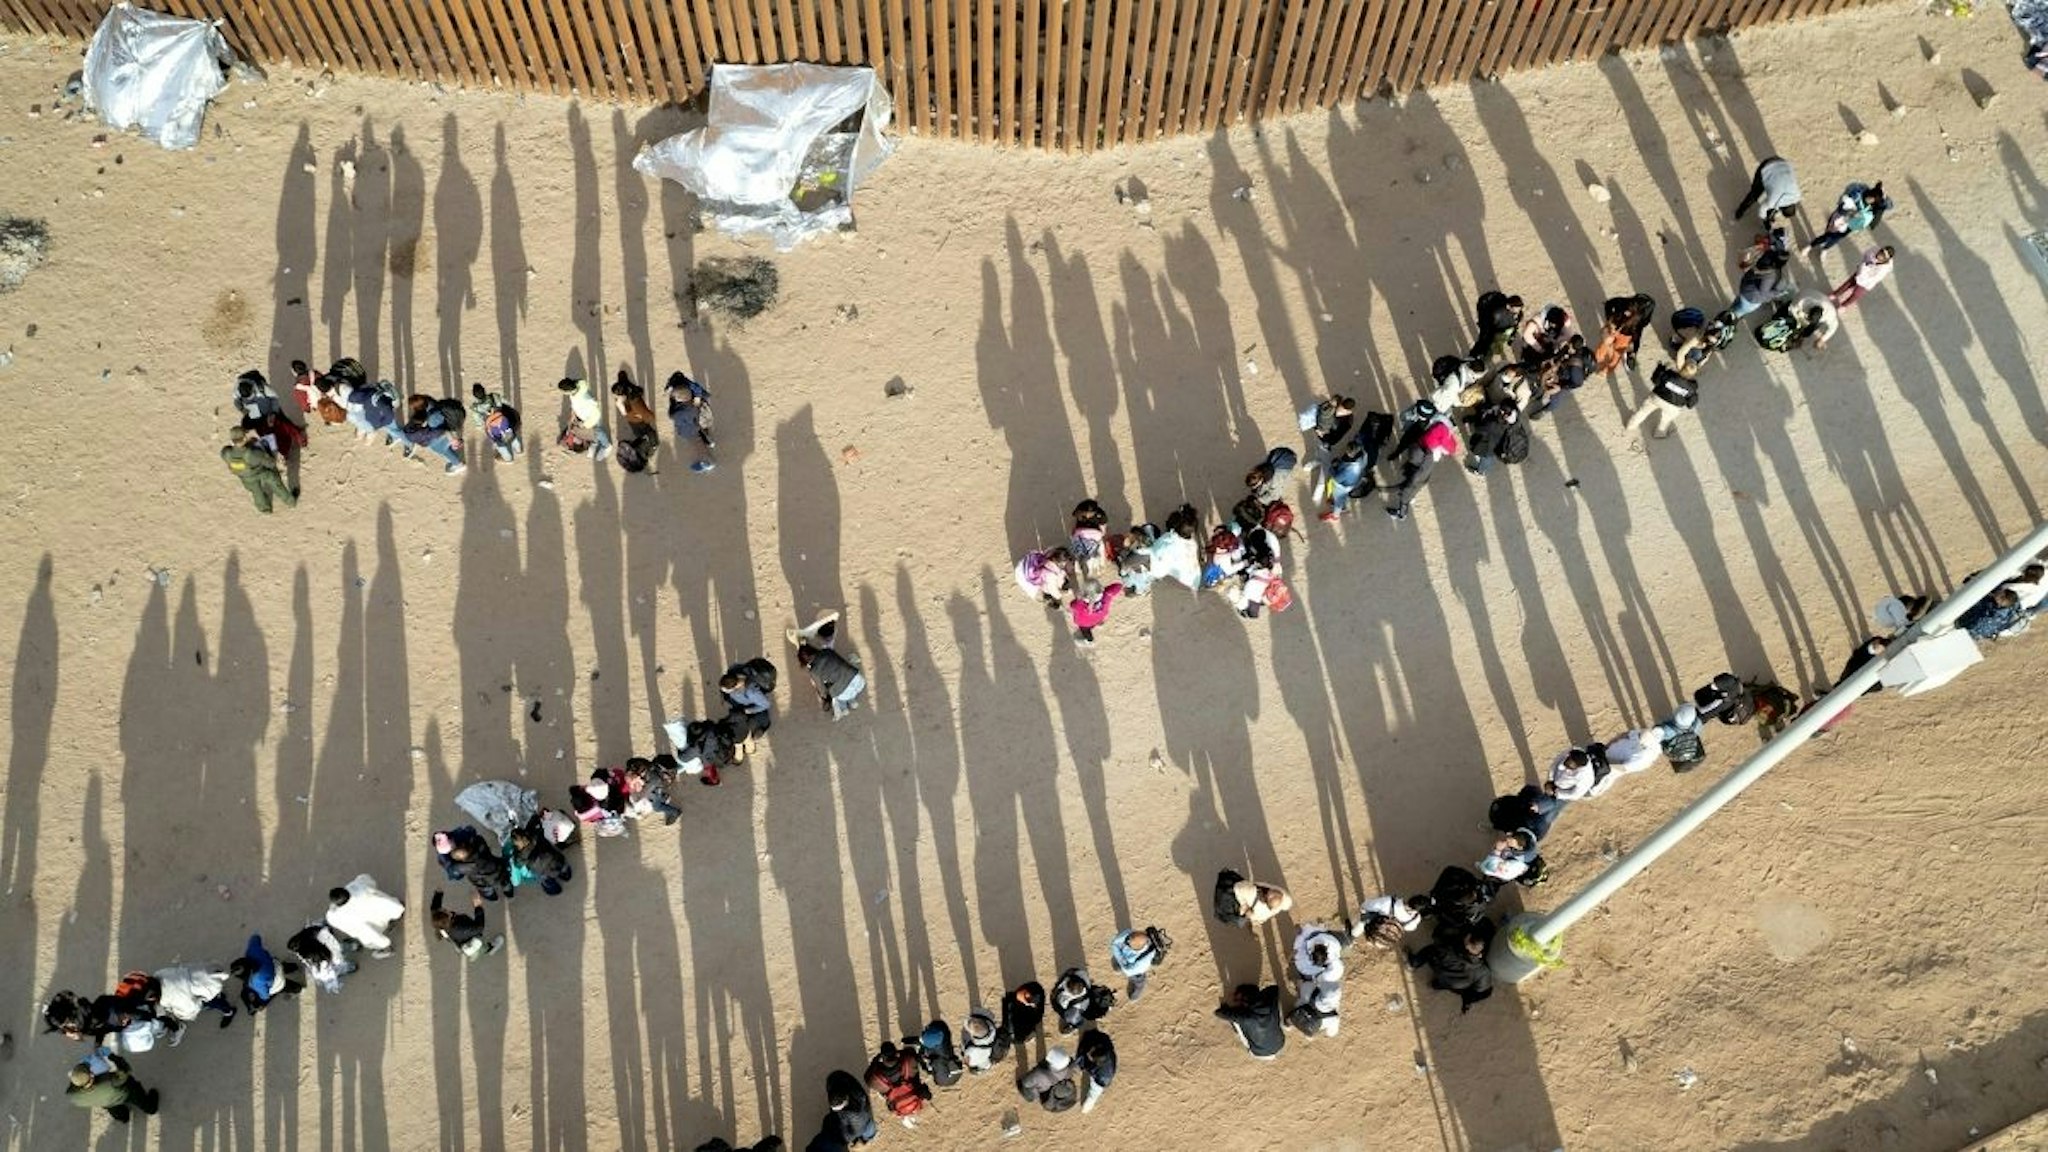 In an aerial view, immigrant families are taken into custody by U.S. Border Patrol agents at the U.S.-Mexico border on December 07, 2021 in Yuma, Arizona.